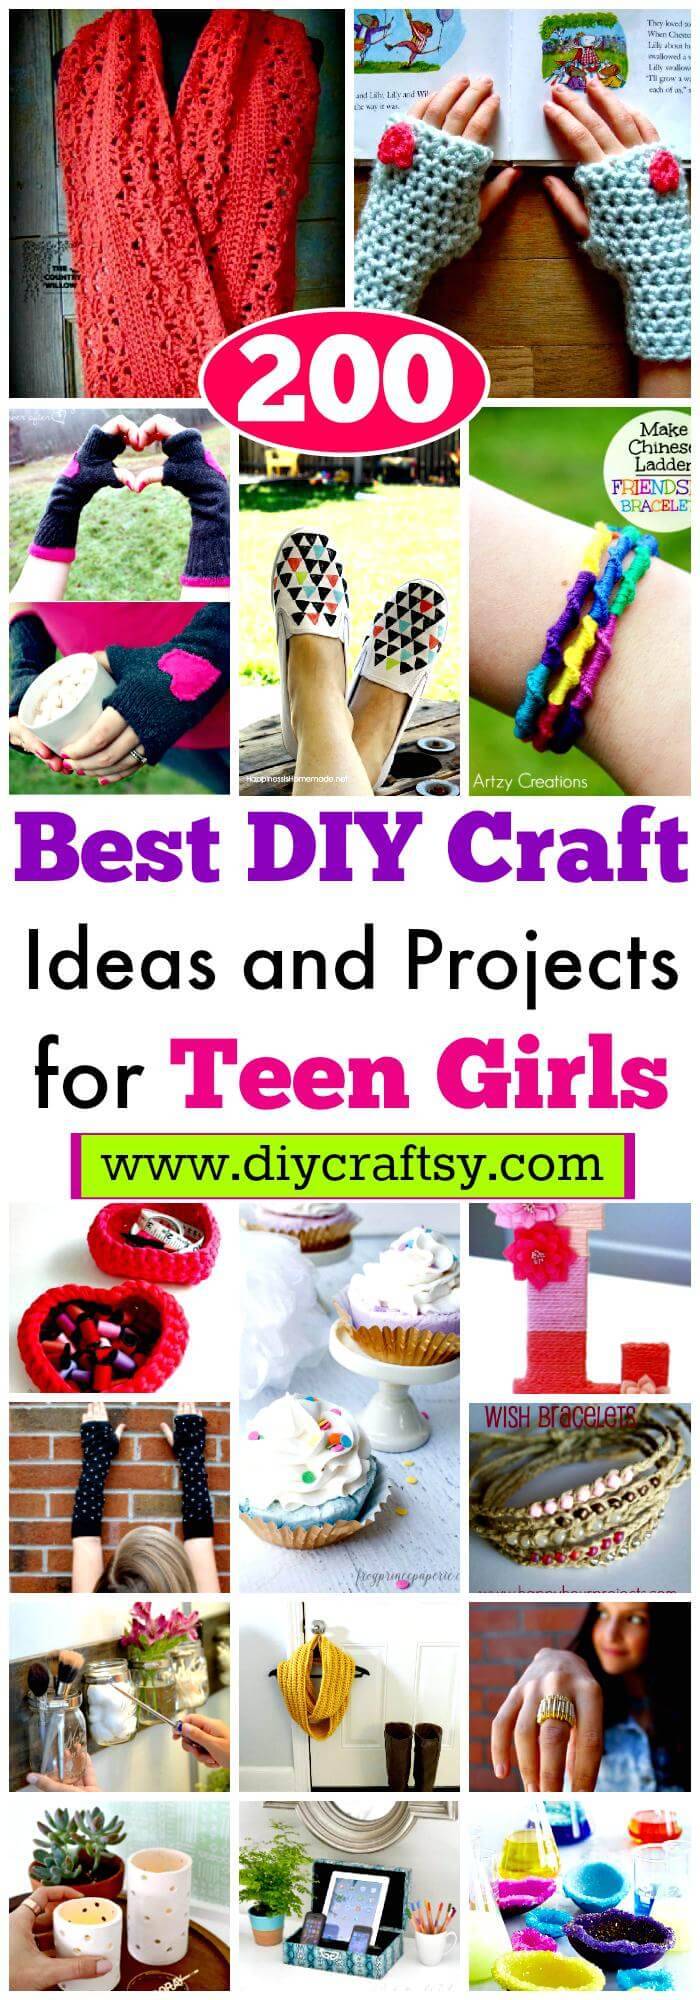 DIY Craft Ideas and Projects for Teen Girls